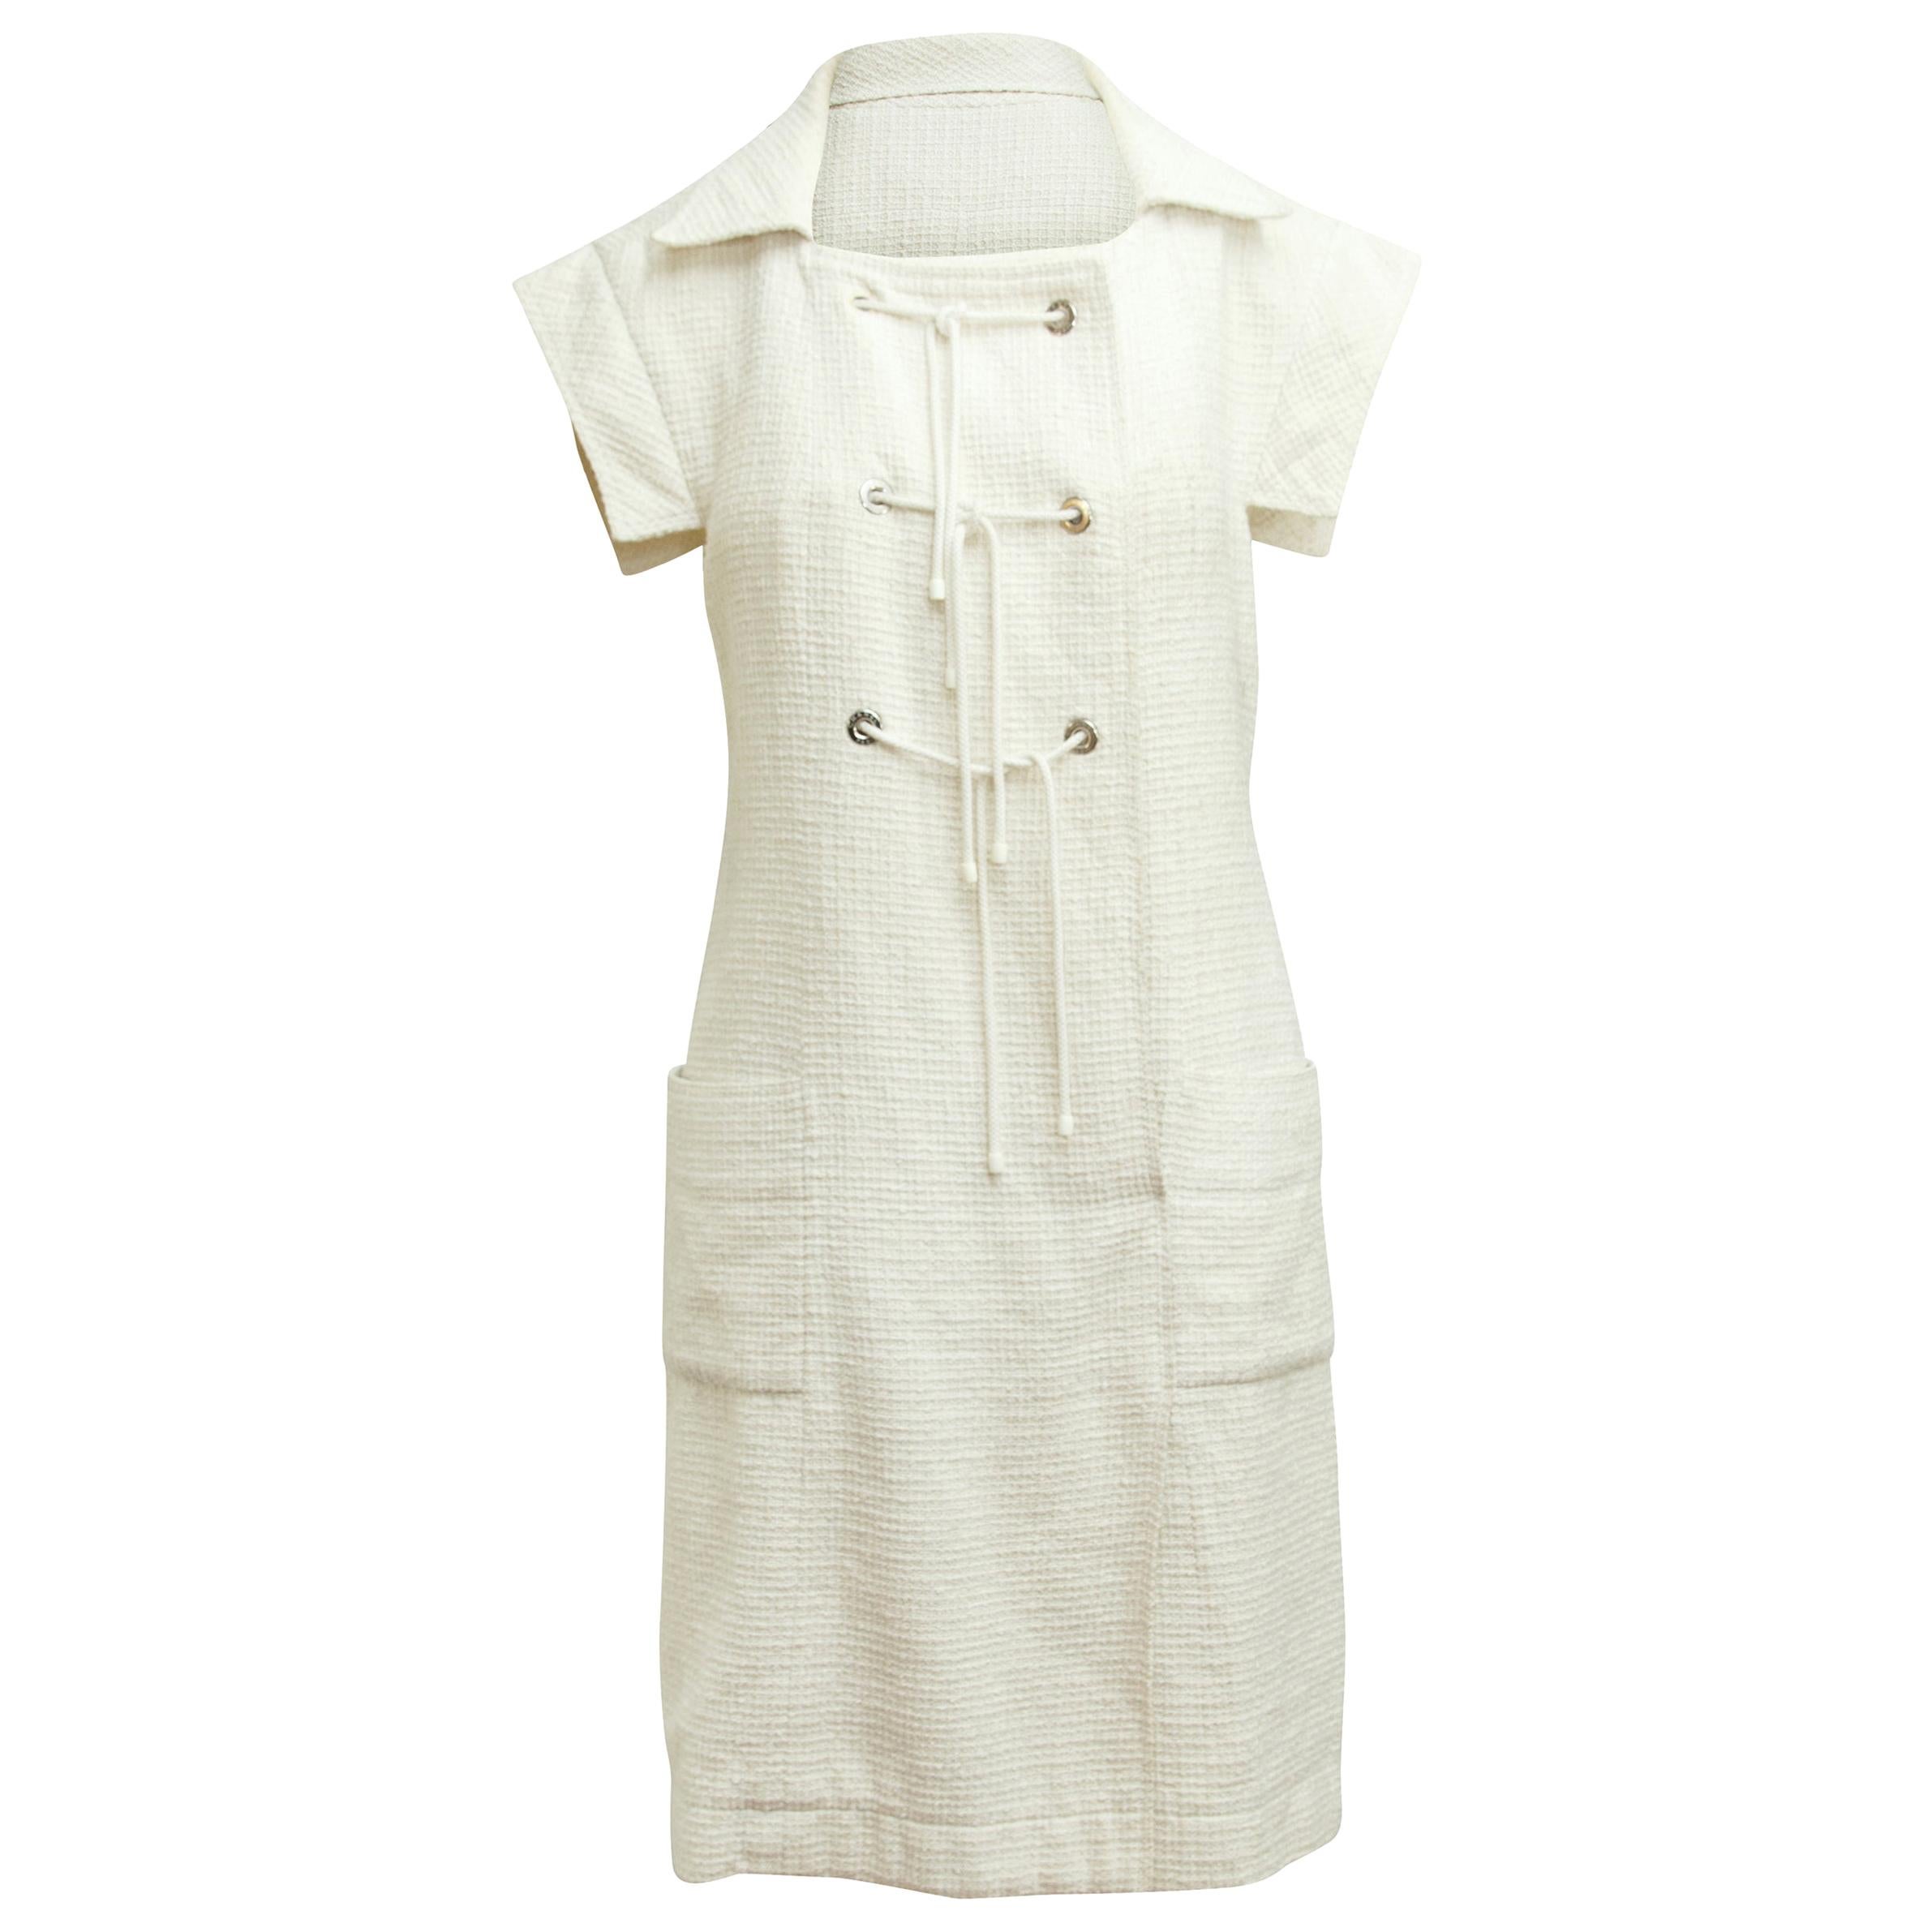 Chanel Cream 2007 Cruise Collection Tweed Shift Dress